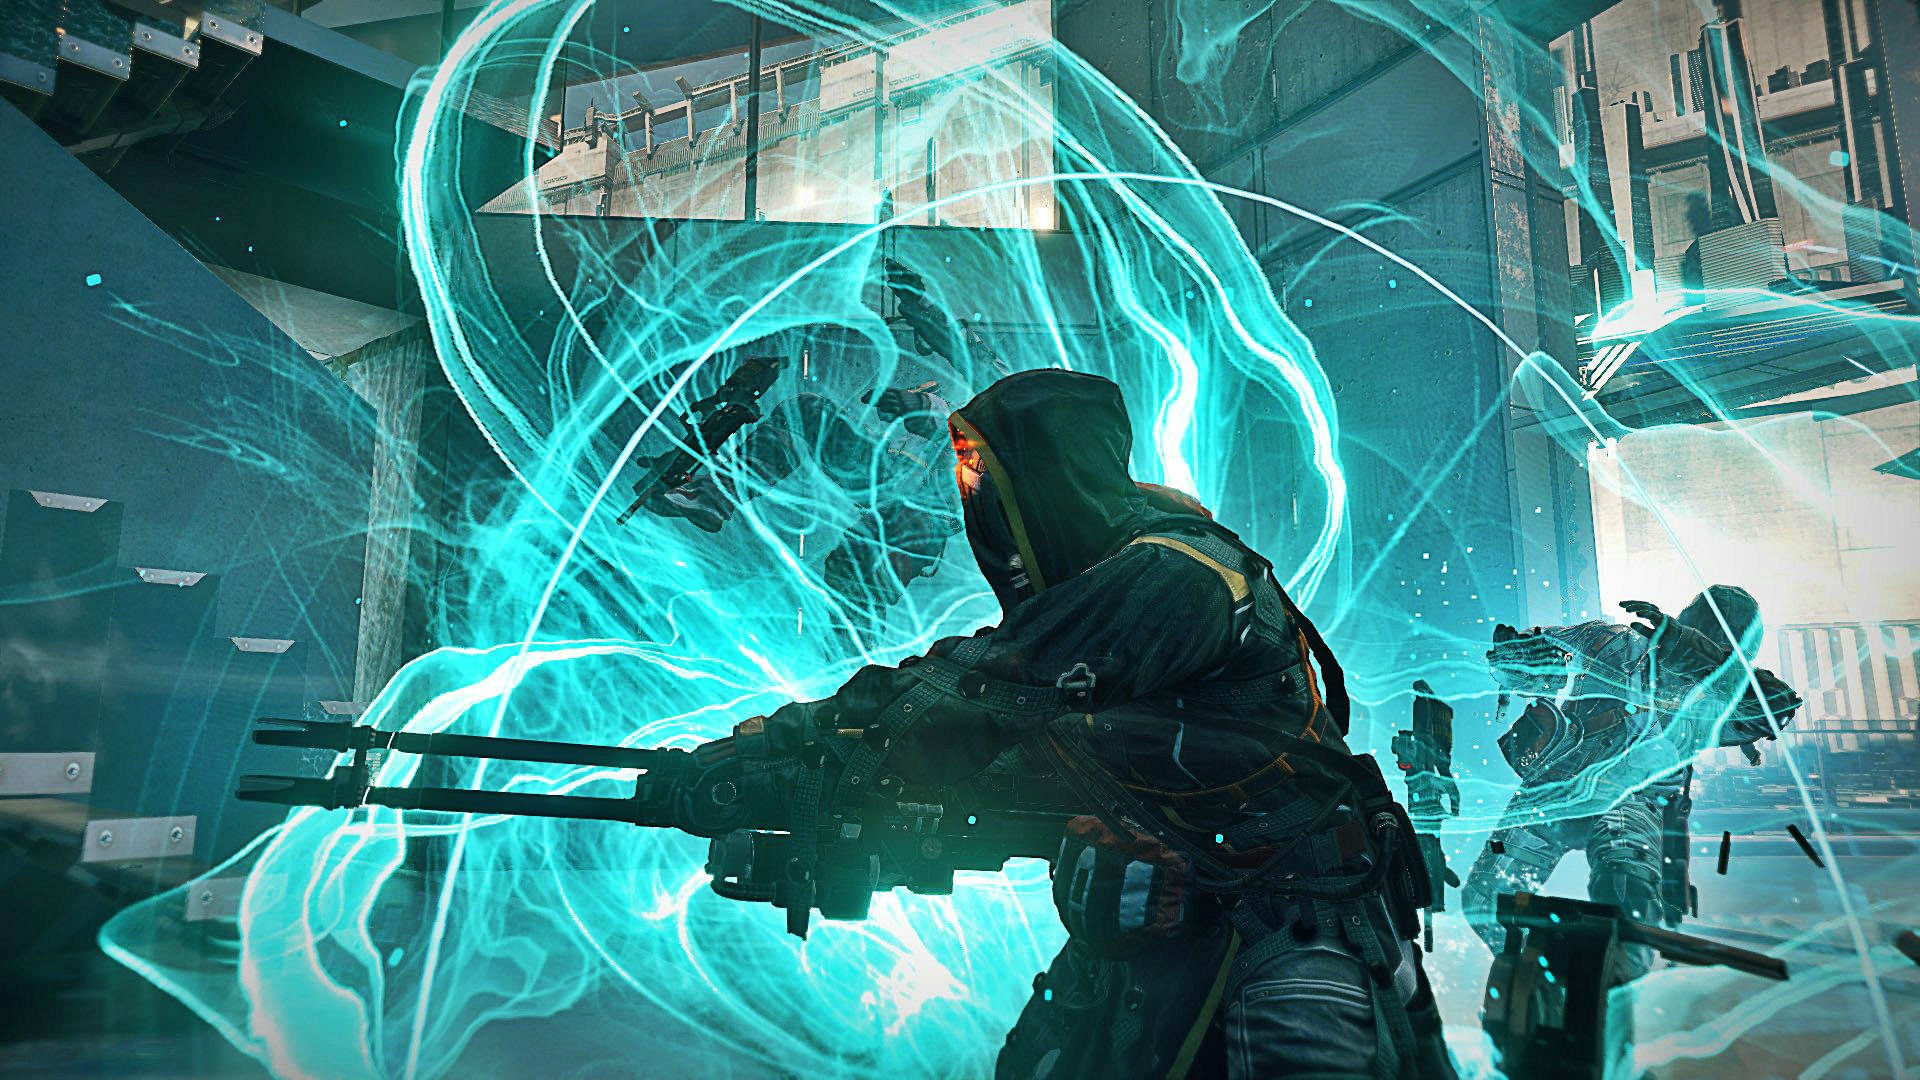 killzone, Stealth, Tactical, Warrior, Sci fi, Futuristic, Shooter, Action, Fighting Wallpaper